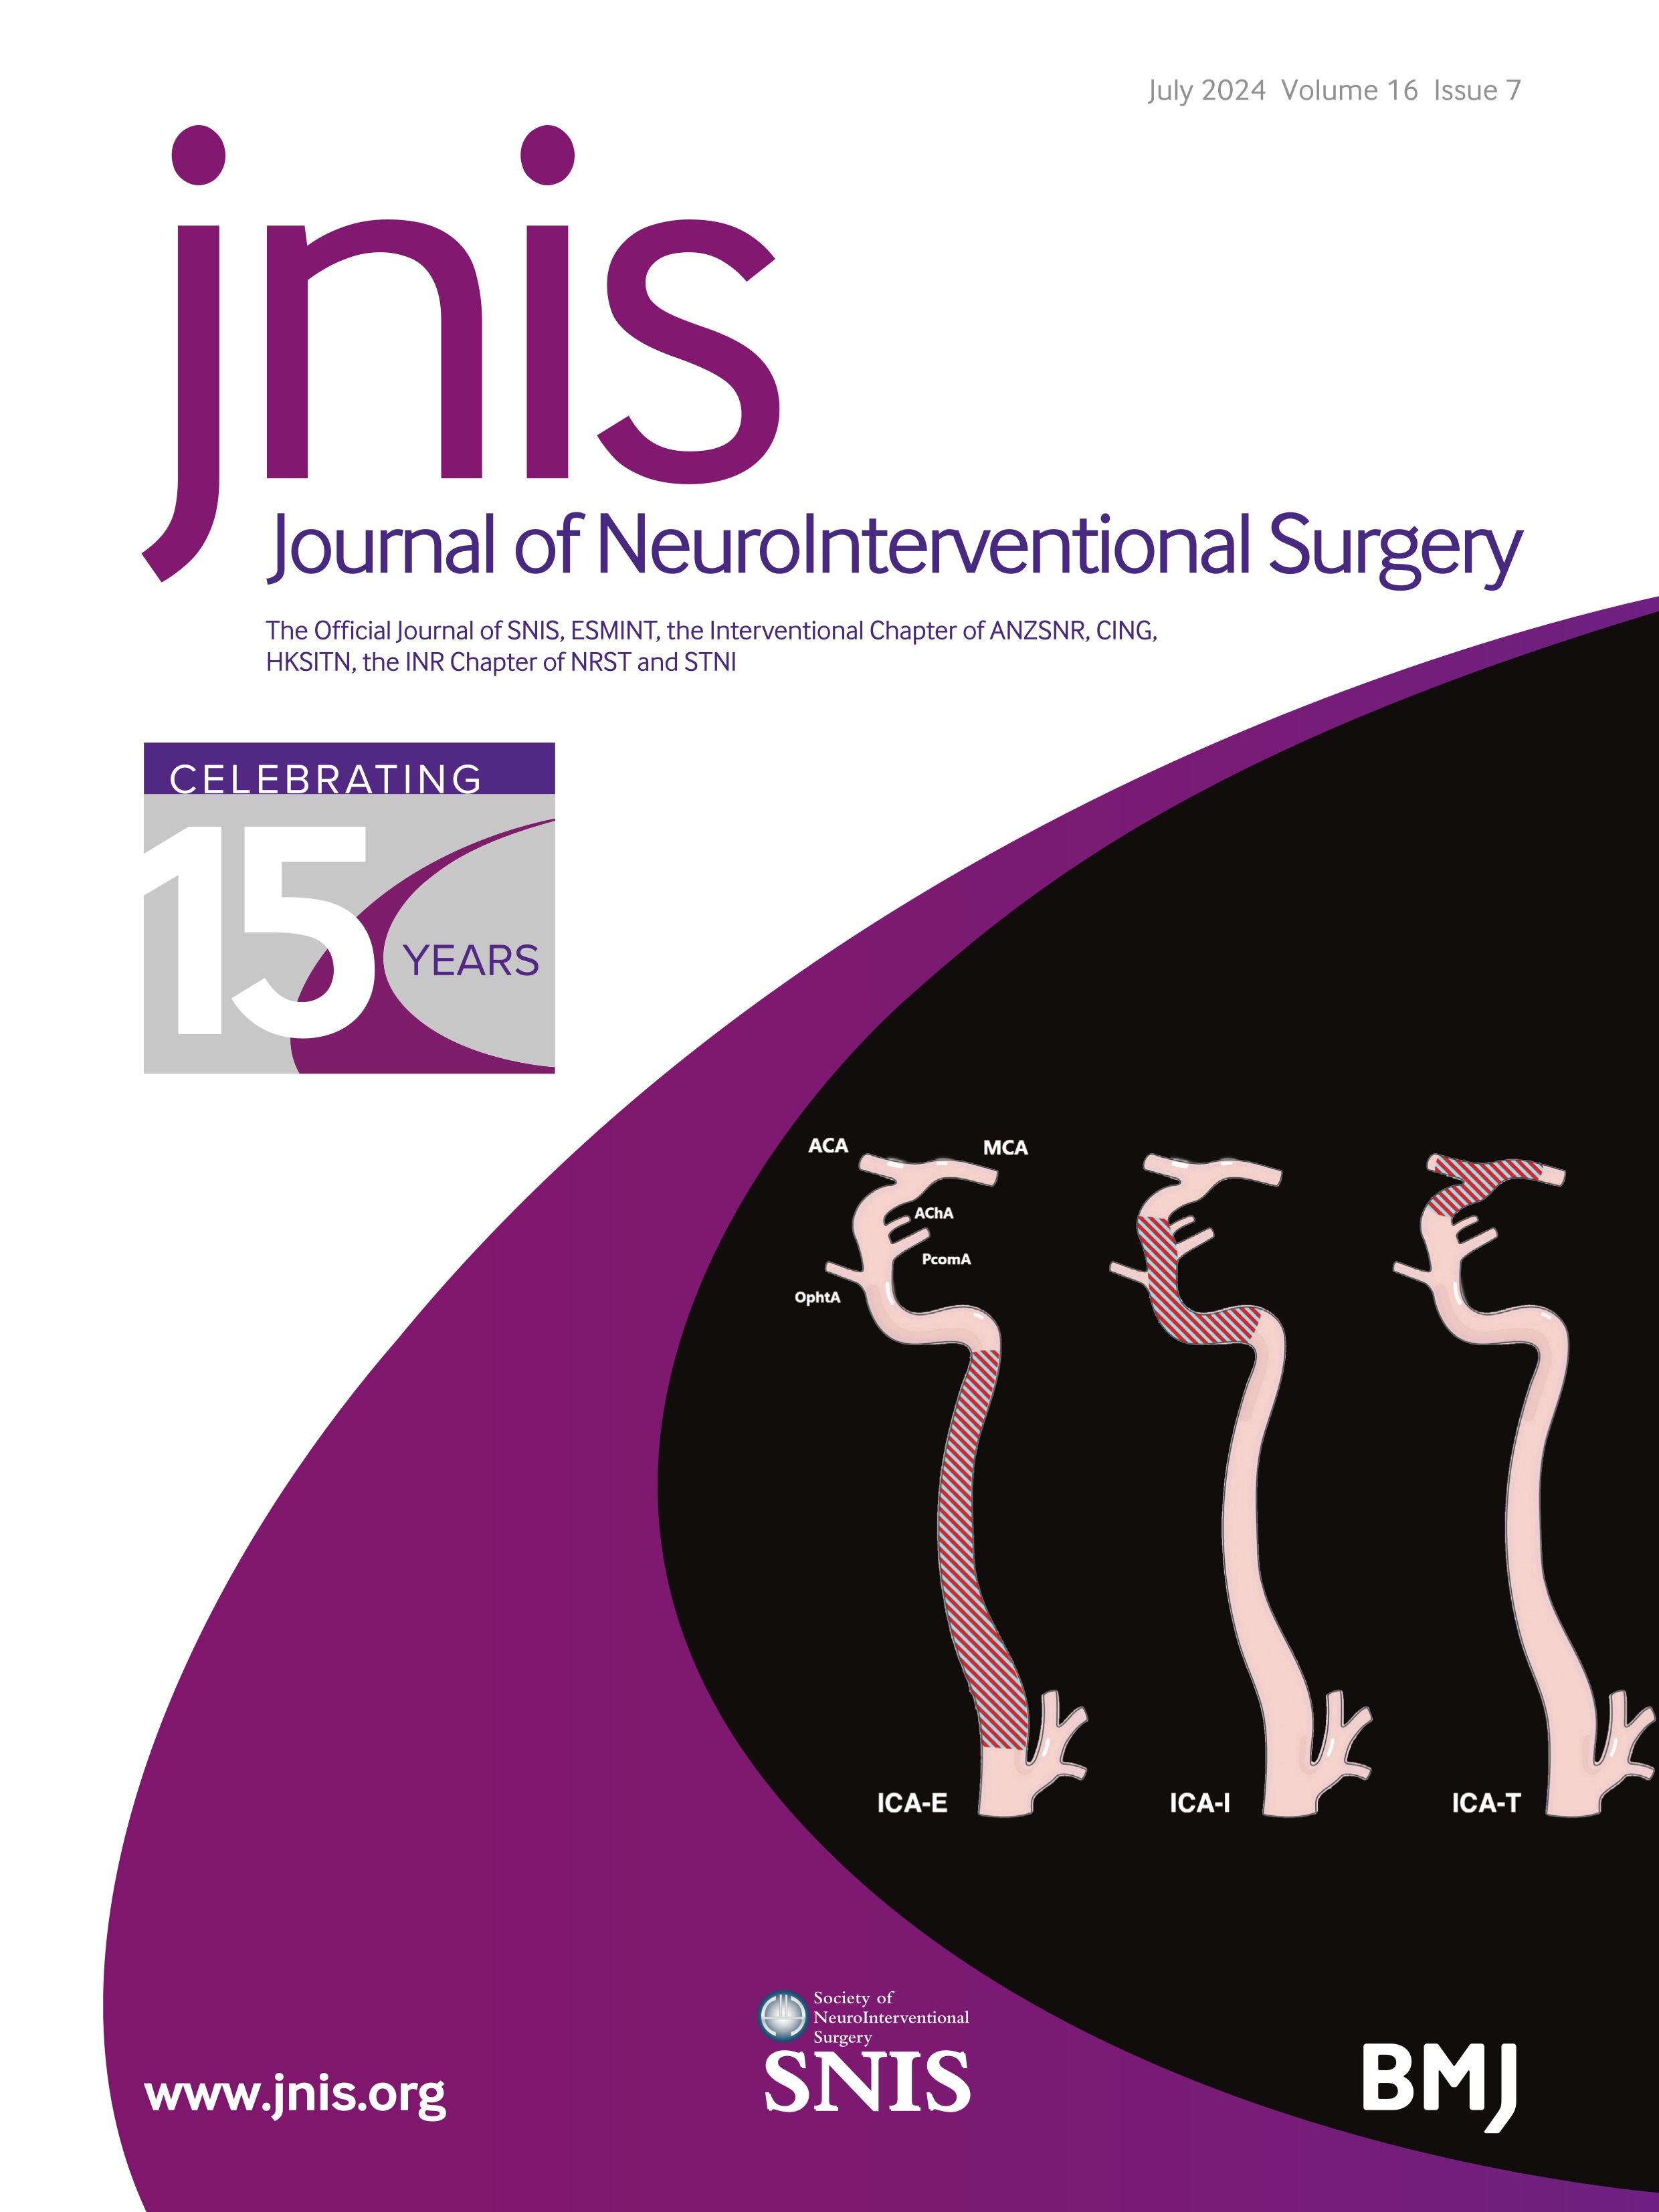 Interventional approaches to symptomatic Tarlov cysts: a 15-year institutional experience